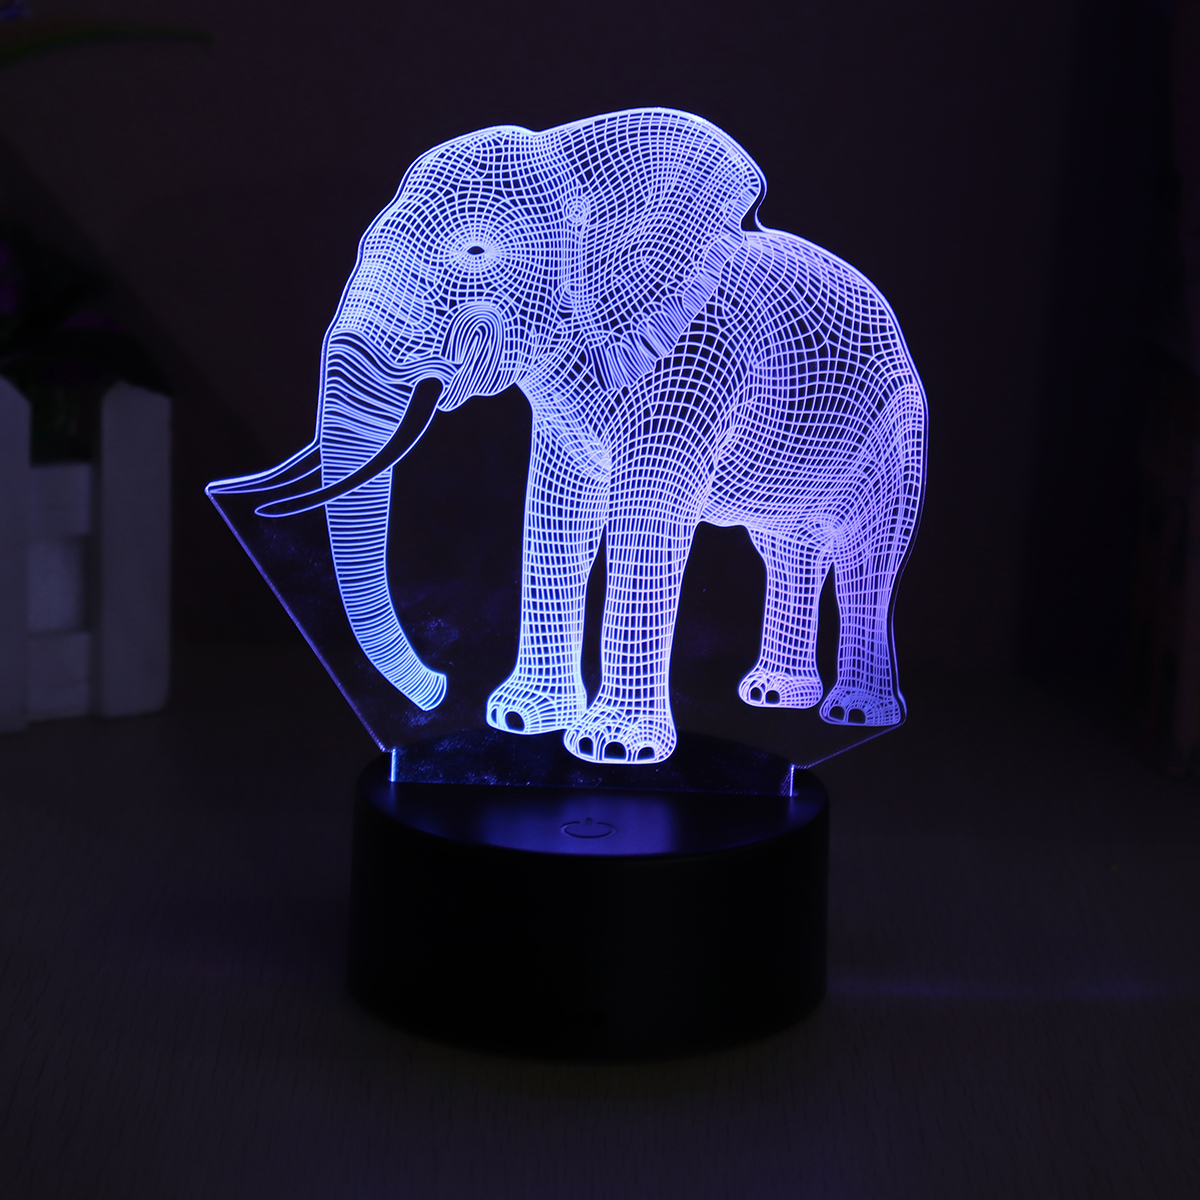 3D-Acrylic-LED-716-Colors-Colorful-Night-Lights-Elephant-Model-Remote-Control-Touch-Switch-Night-Lig-1370467-9